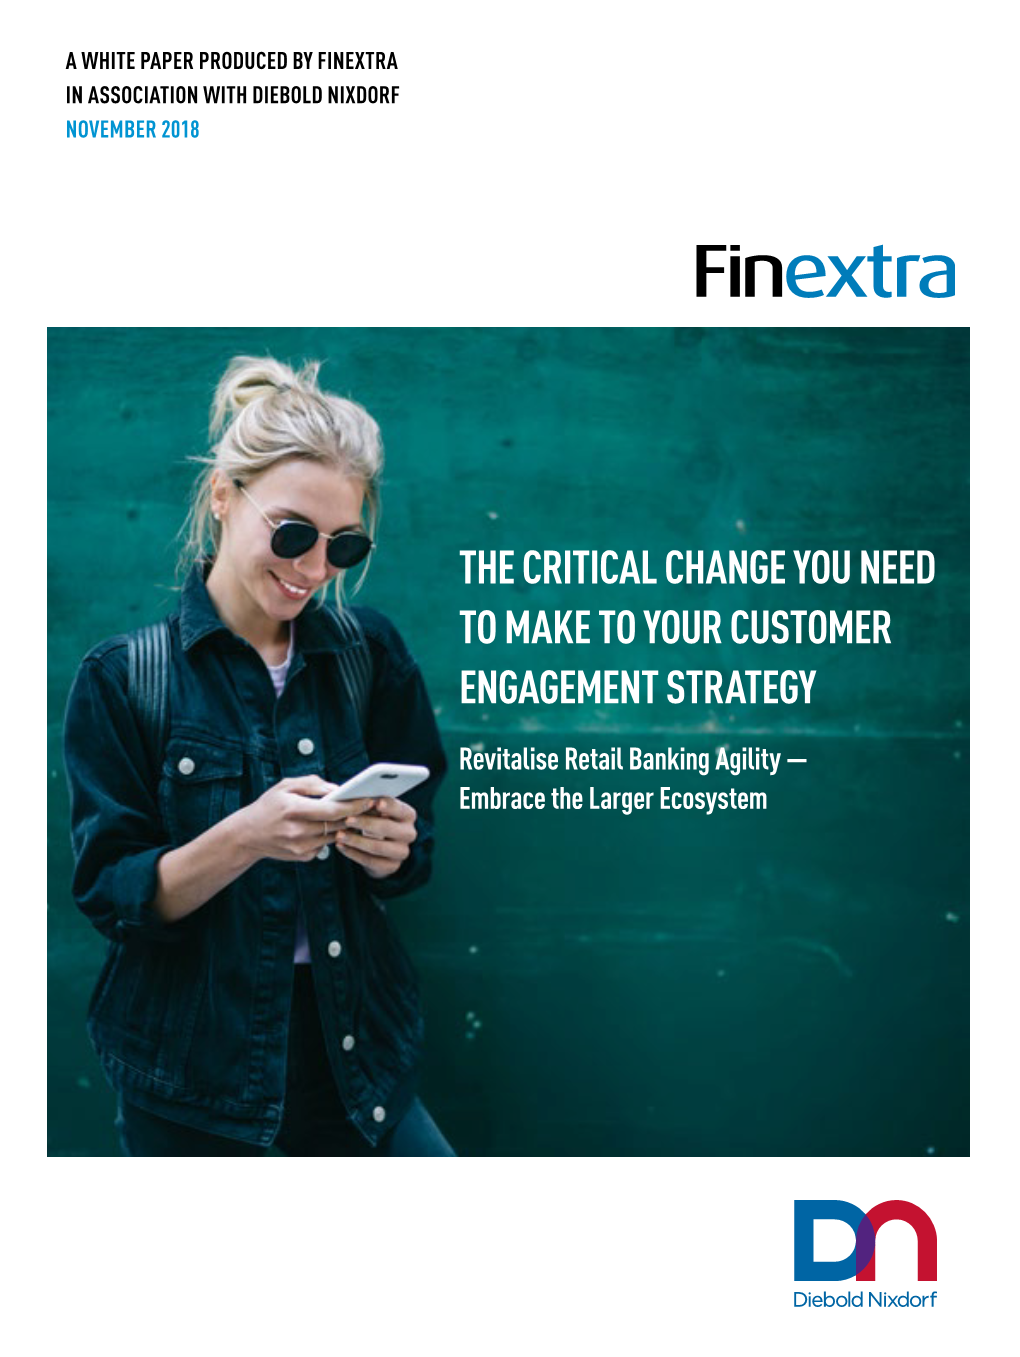 Whitepaper: the Critical Change You Need to Make Your Customer